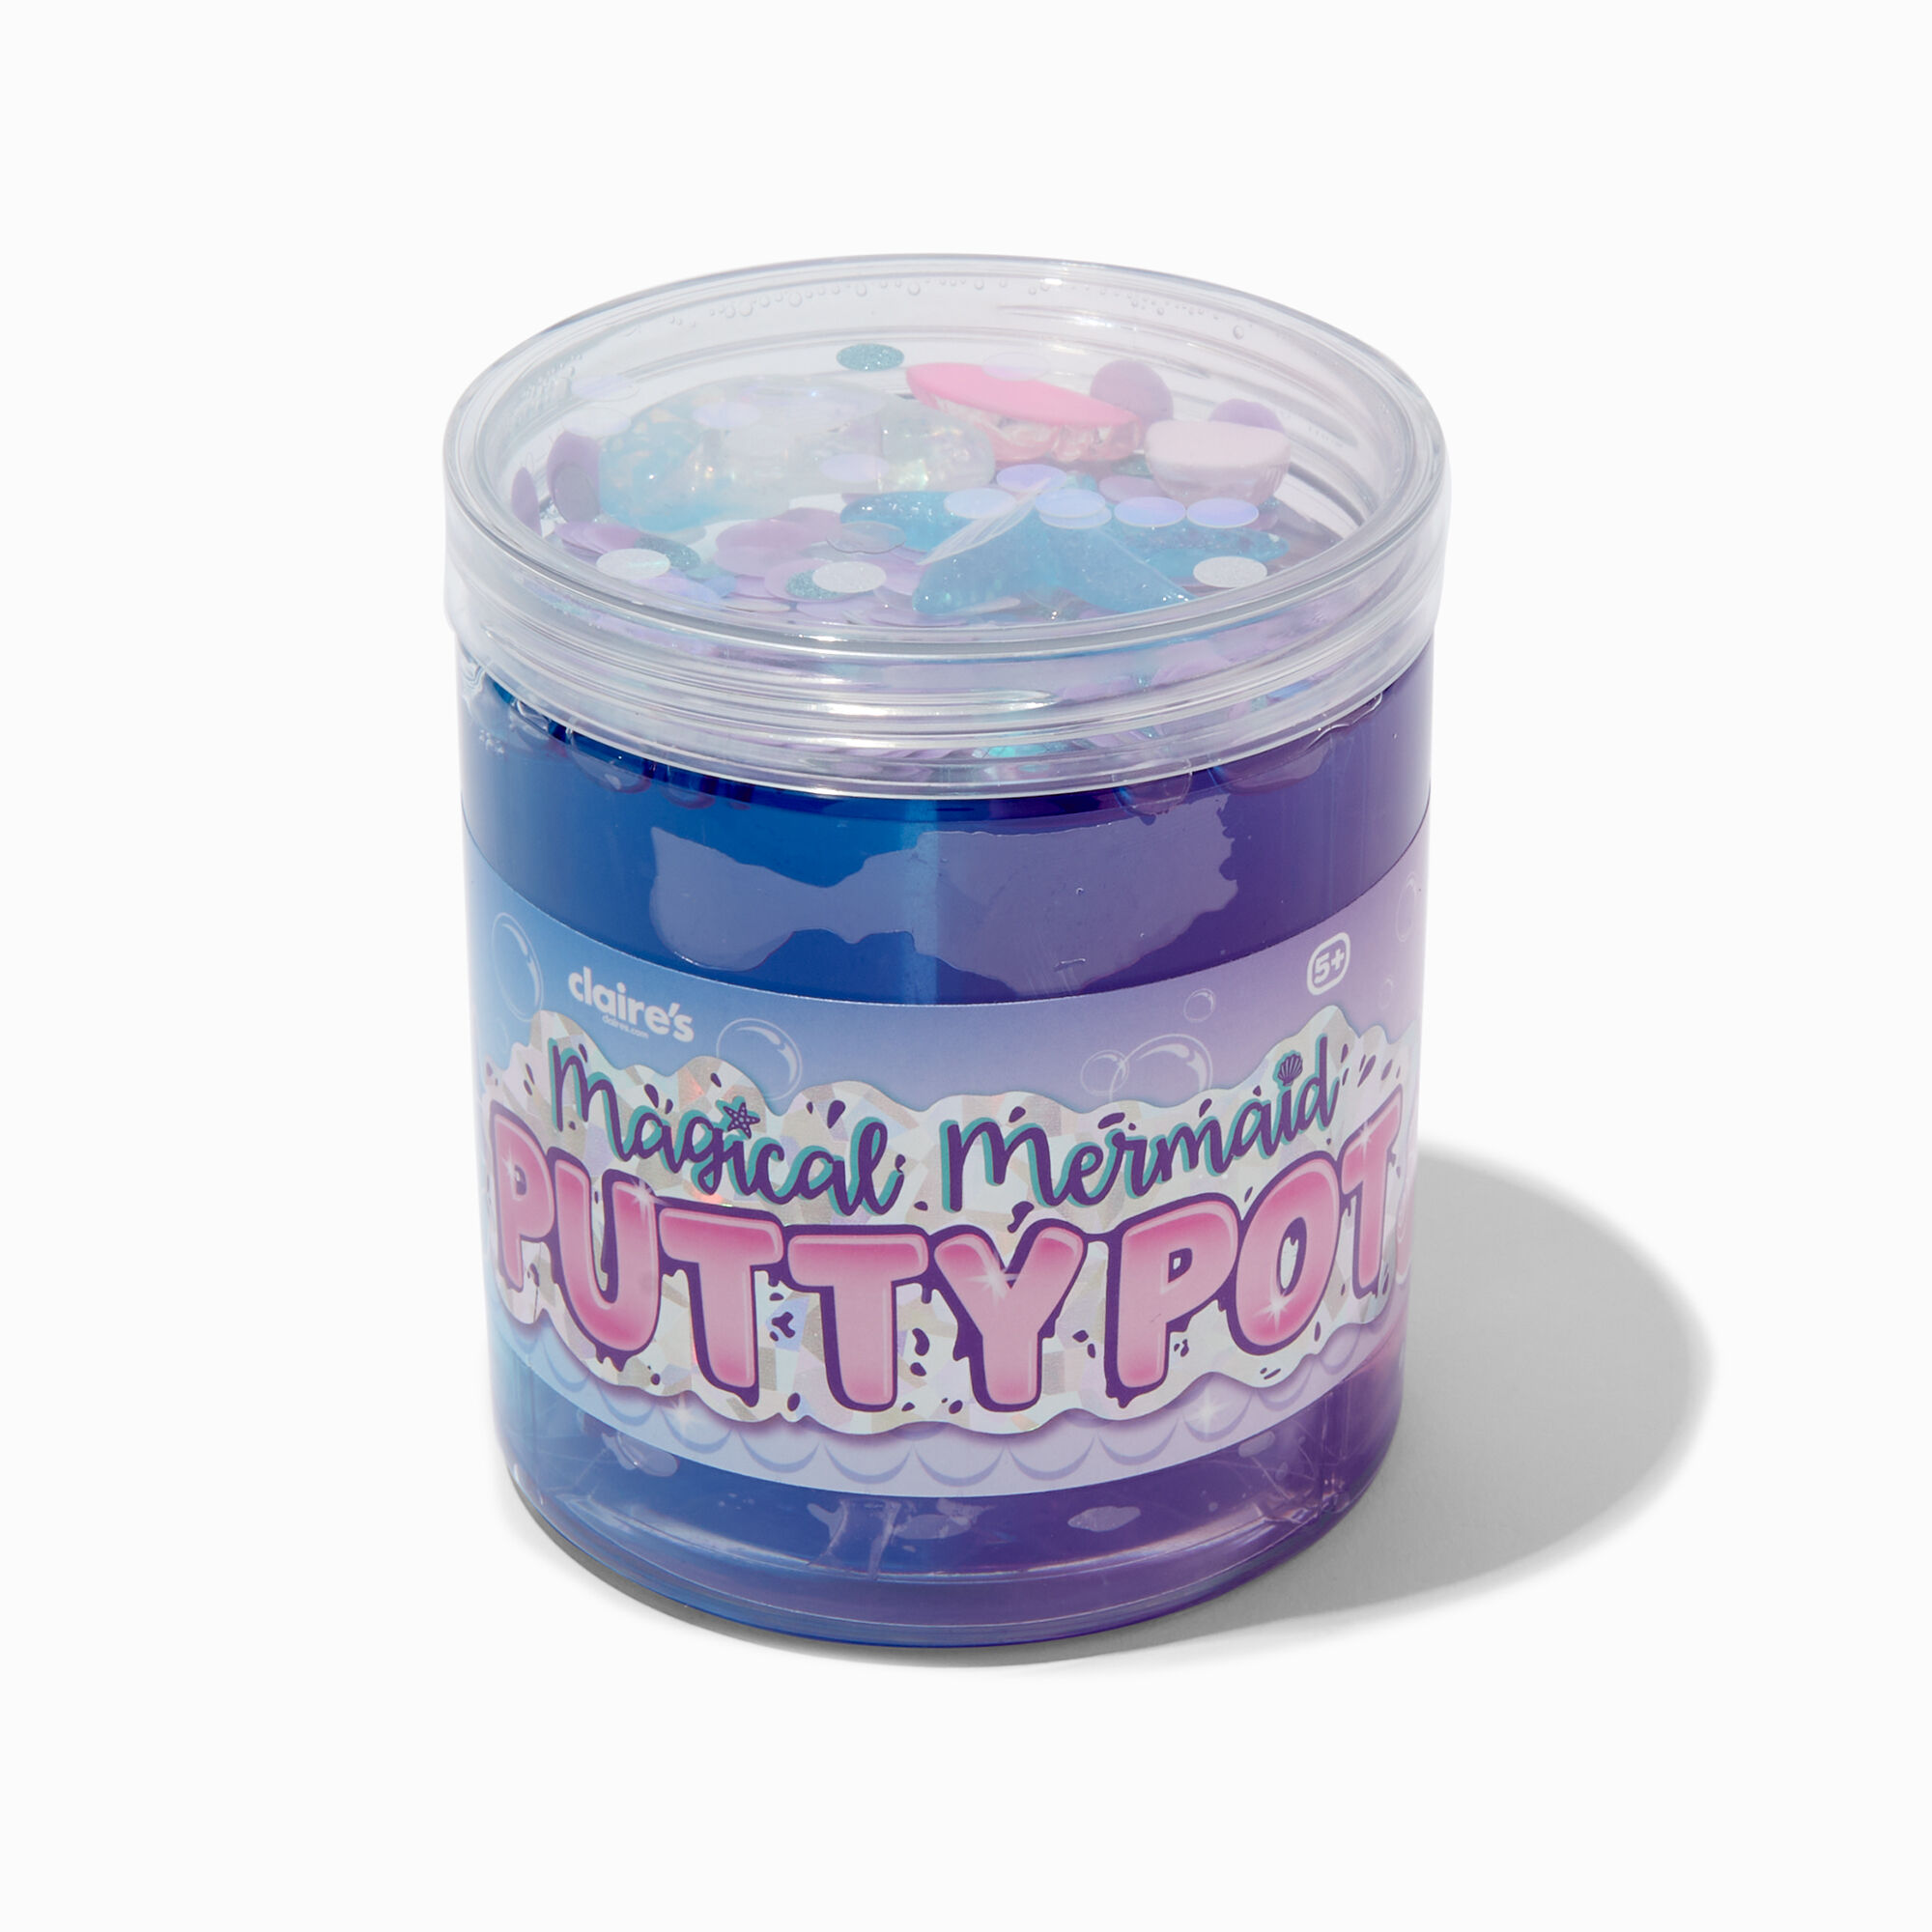 View Magical Mermaid Claires Exclusive Putty Pot information